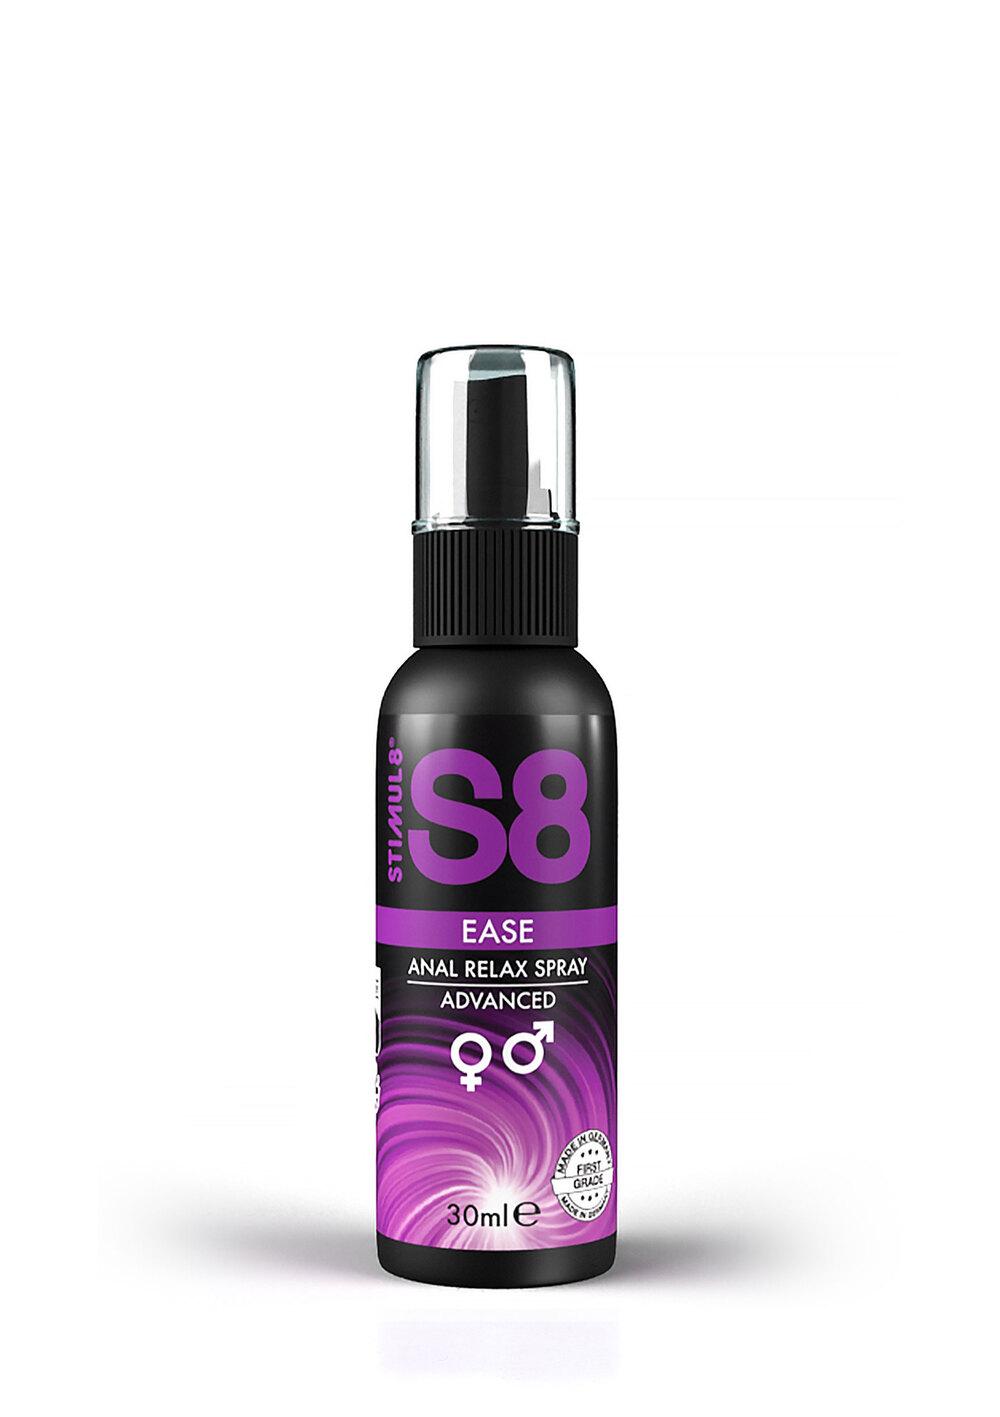 S8 Ease Anal Relax Sprej 30 ml Stimul8